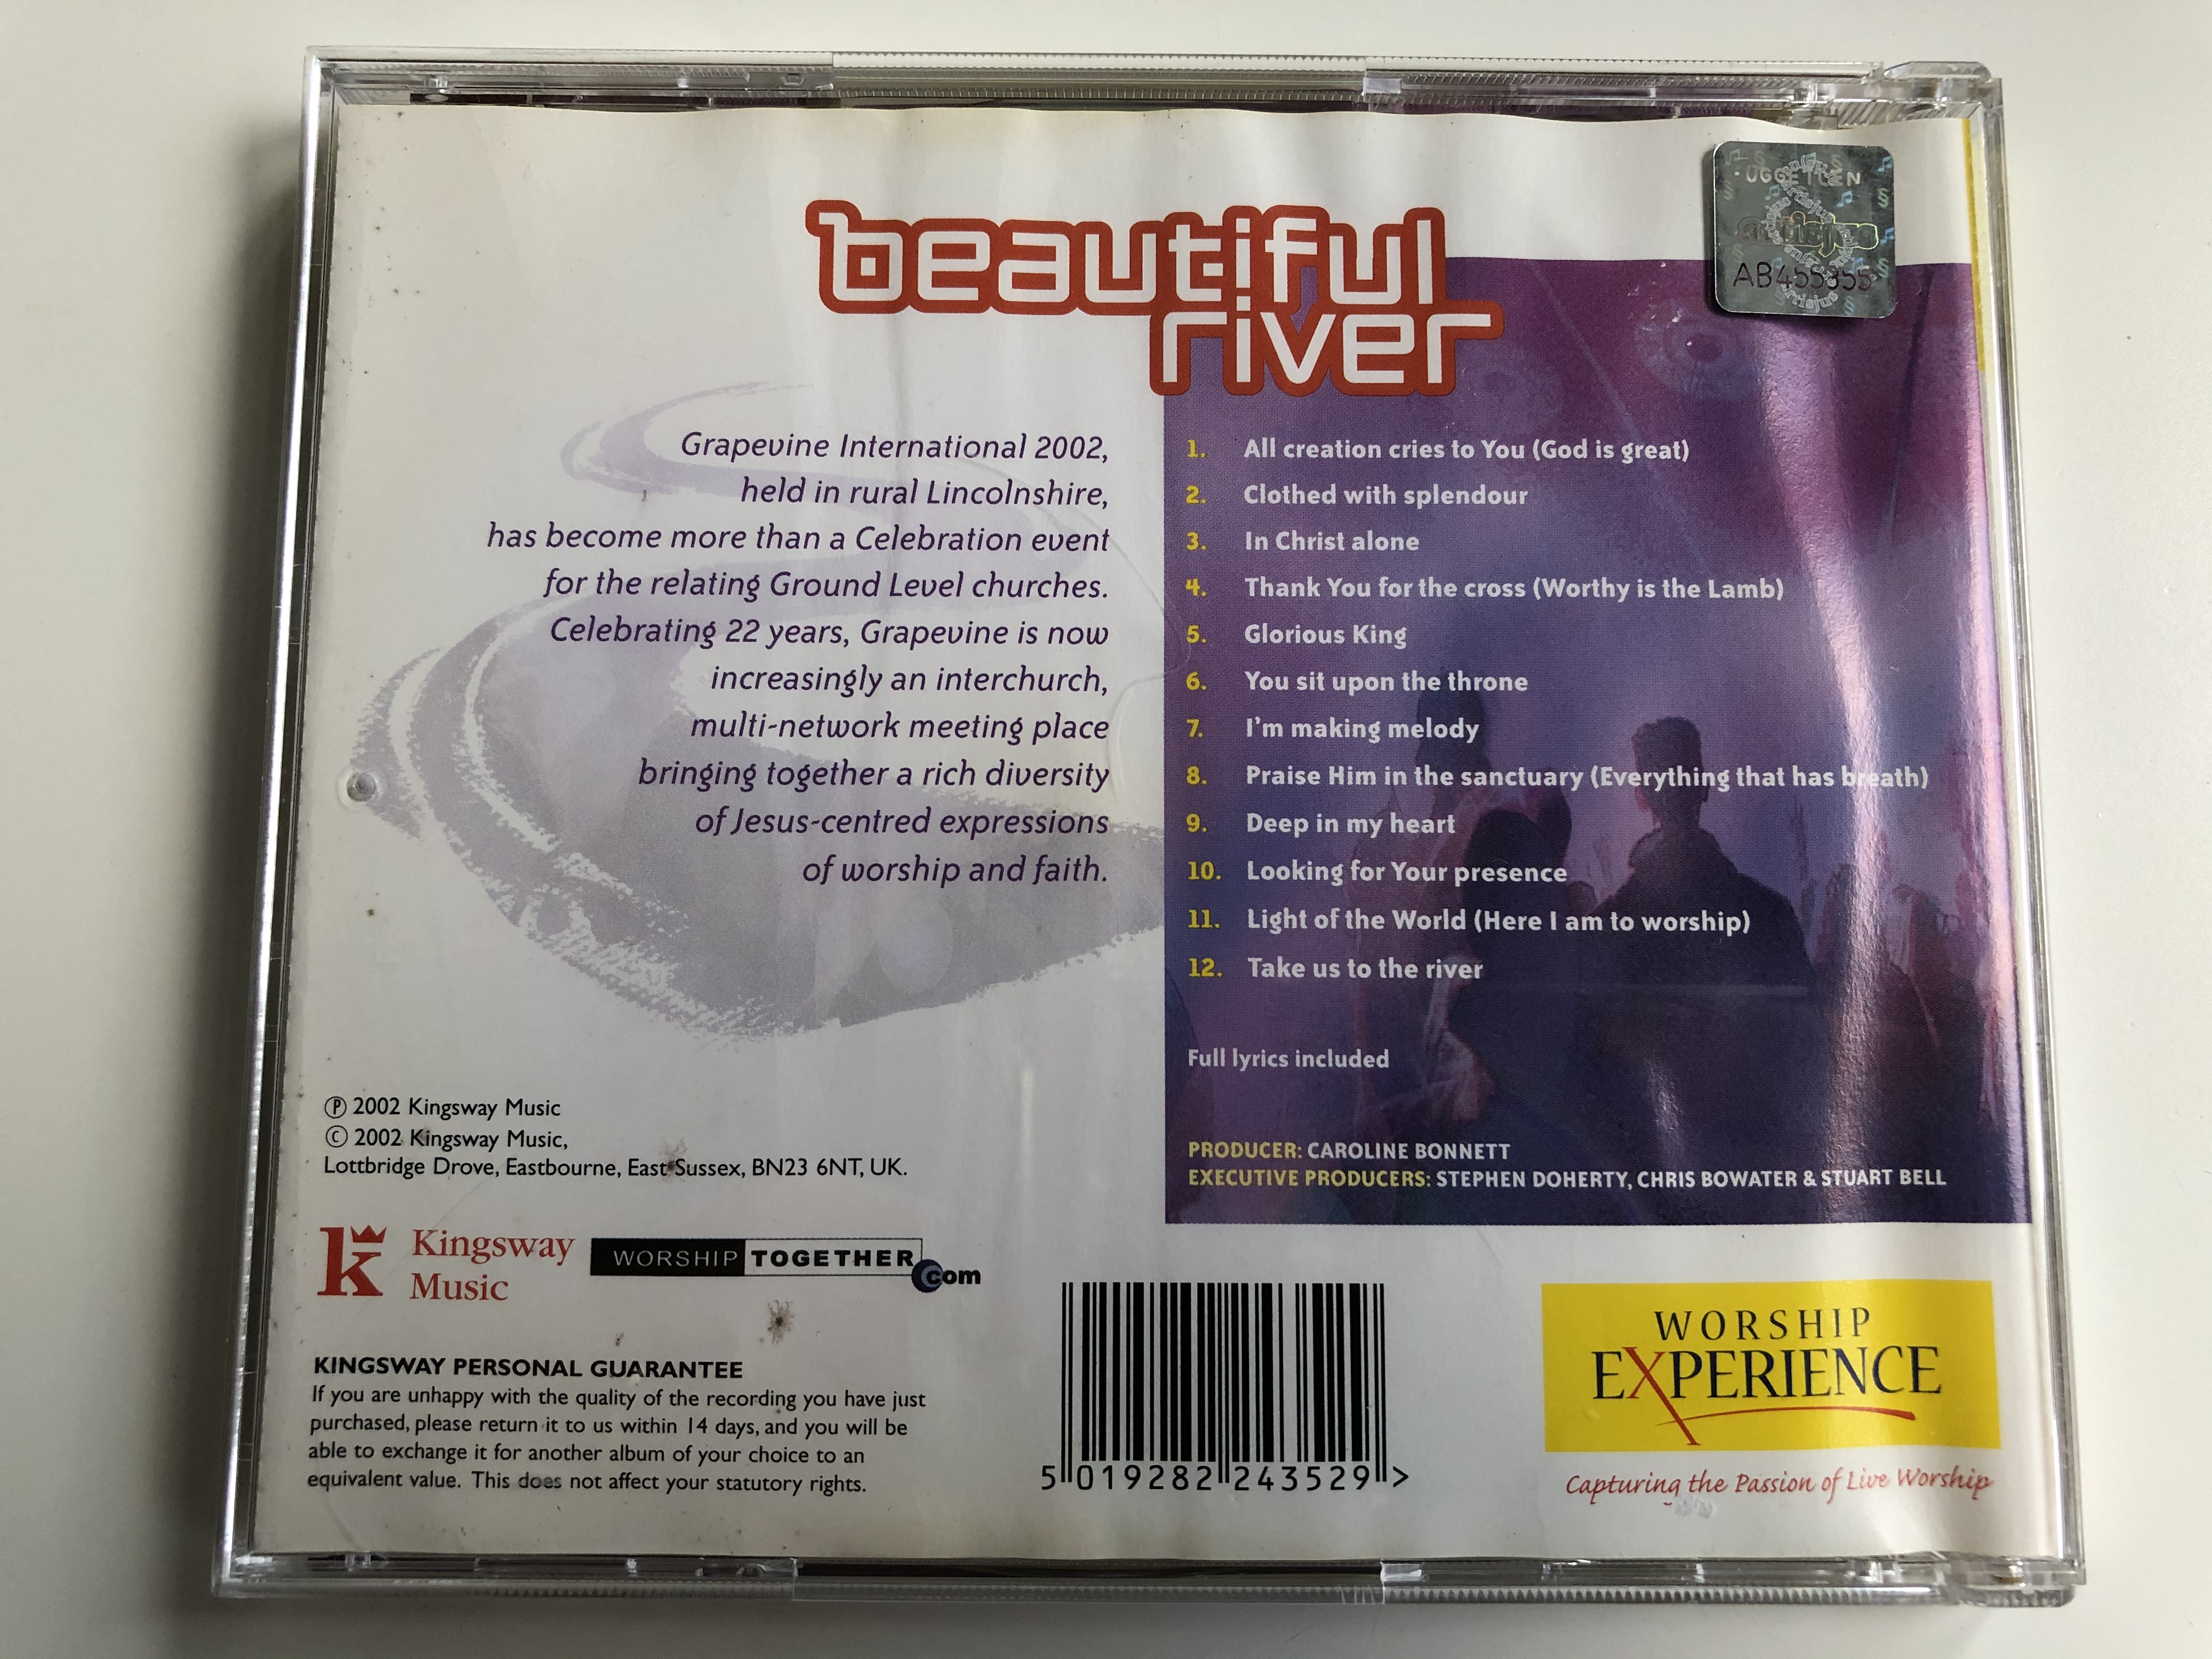 beautiful-river-live-worship-from-grapevine-2002-worship-experience-kingsway-music-audio-cd-2002-kmcd2435-8-.jpg